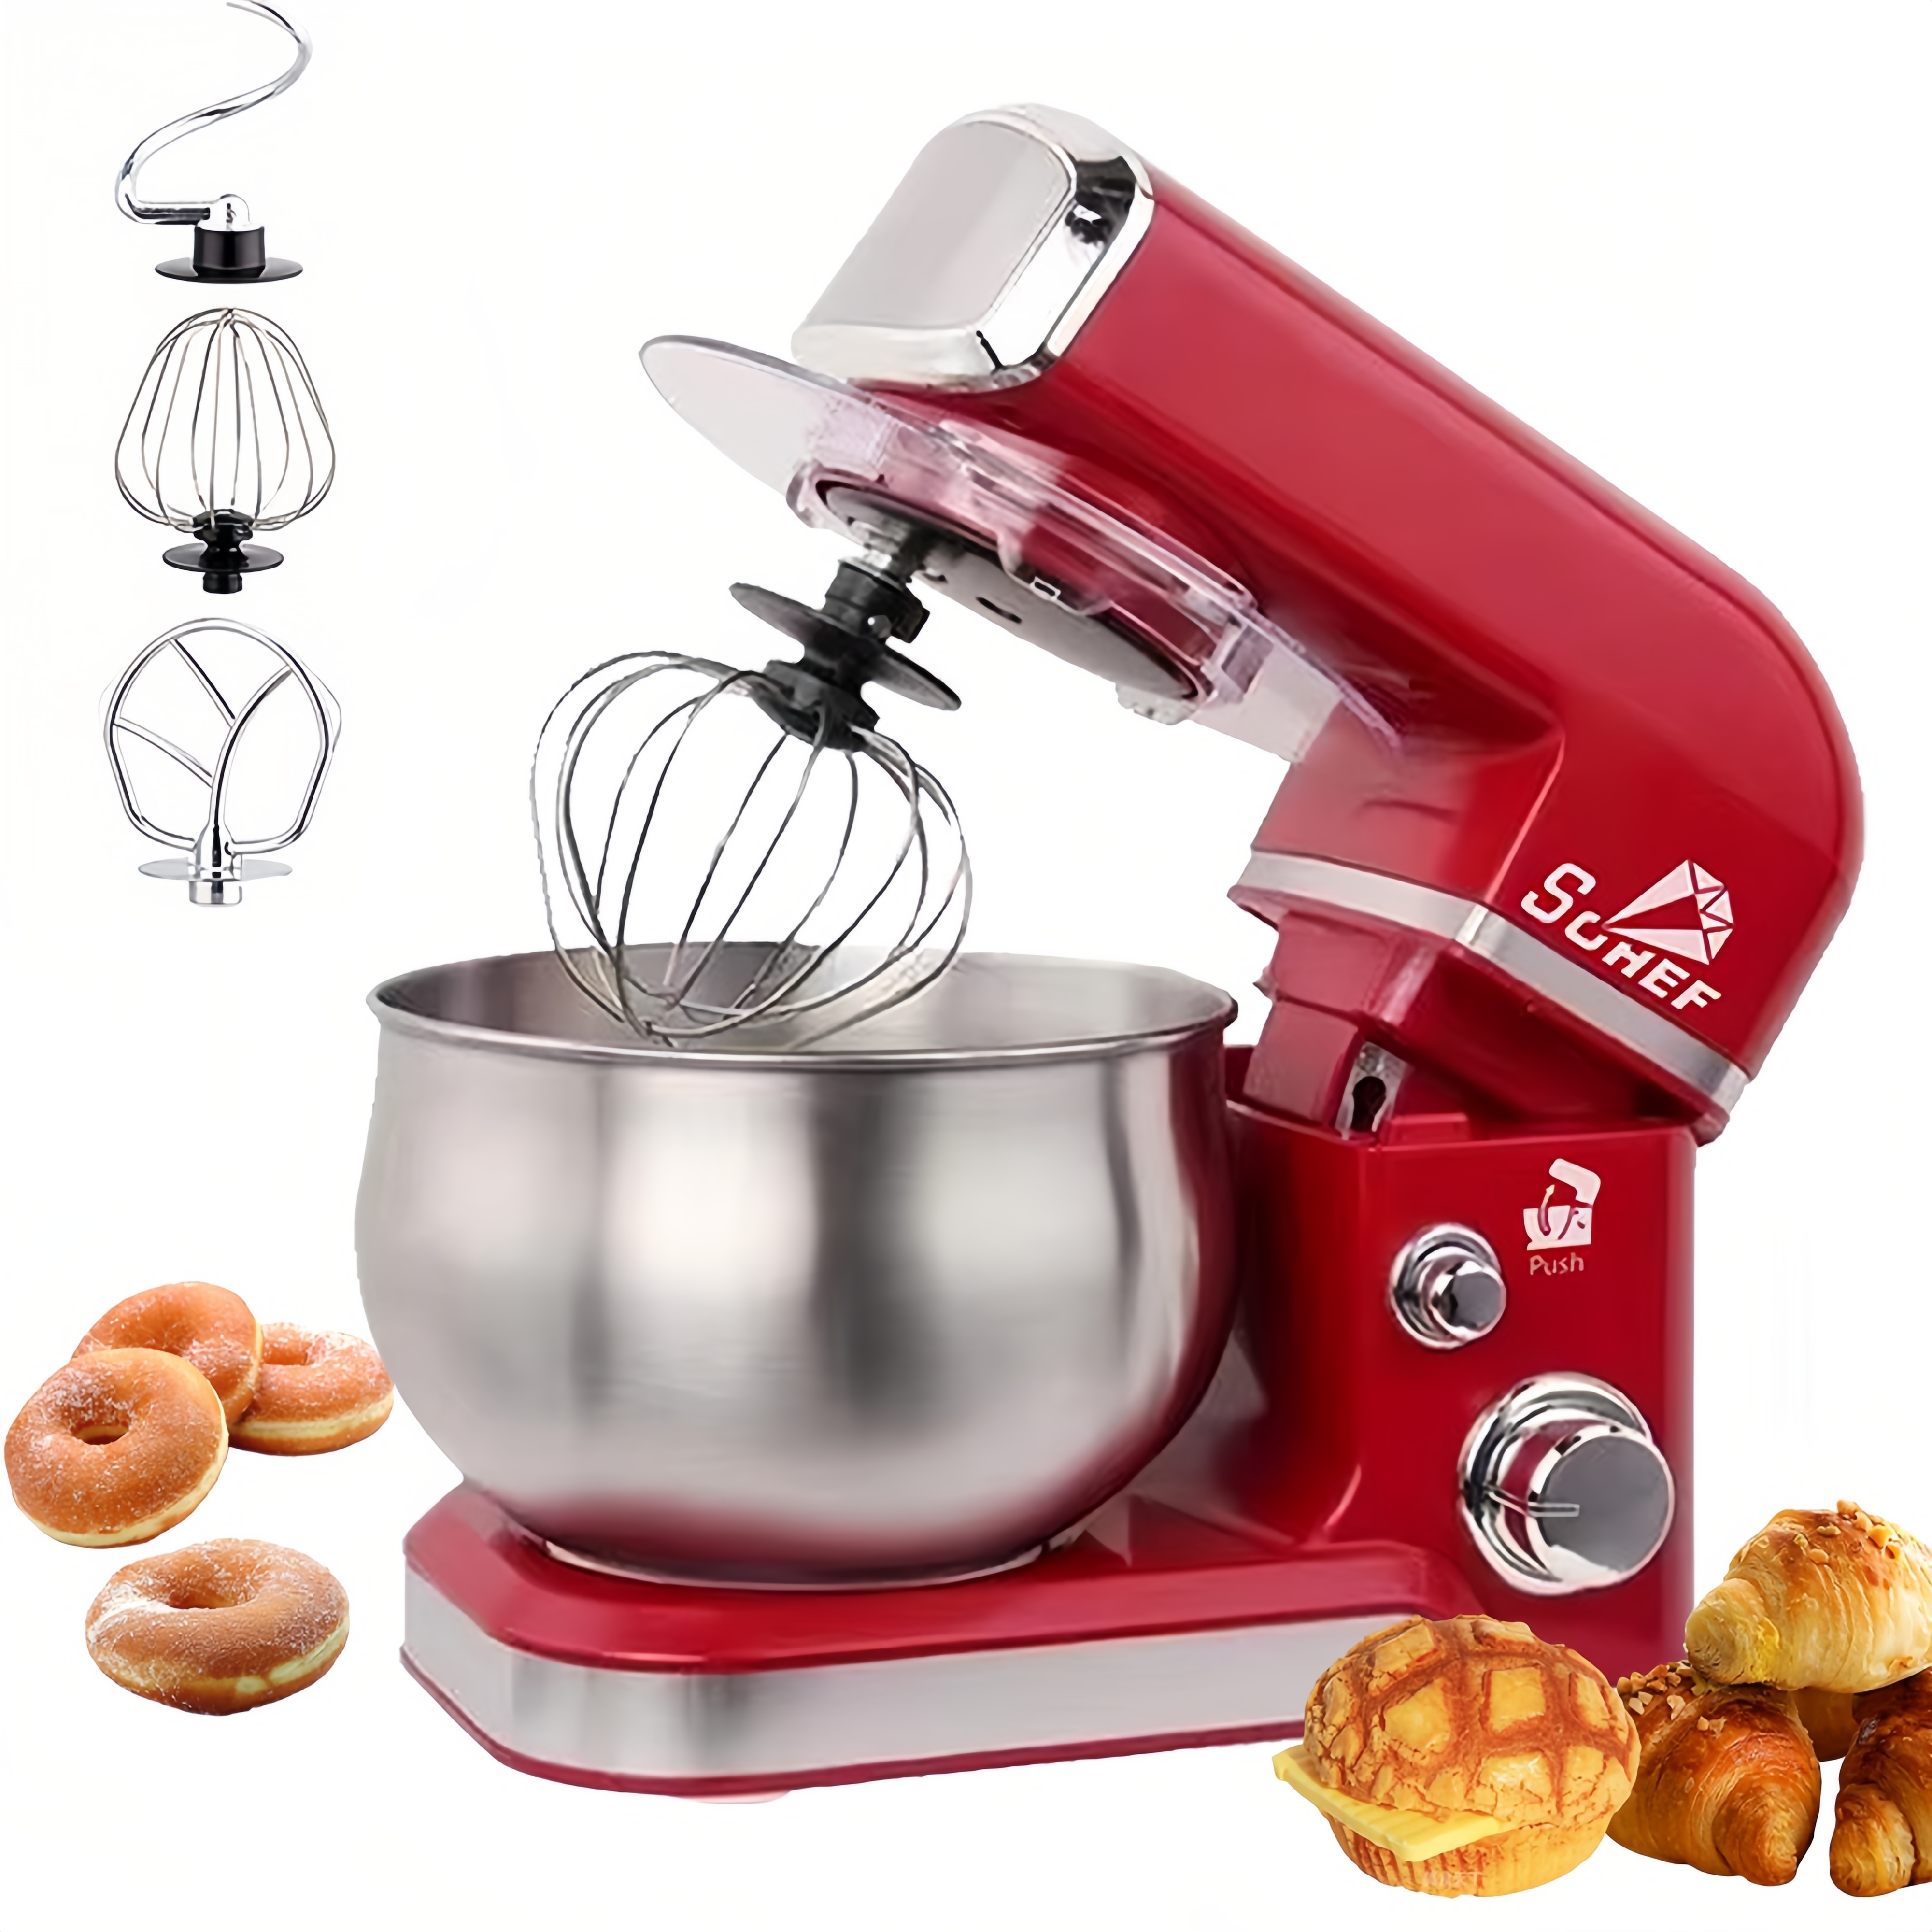 fully automatic multi functional kitchen electric mixer 4 5qt automatic dough mixer home whisk electric food mixer stand mixer cook machinefully automat